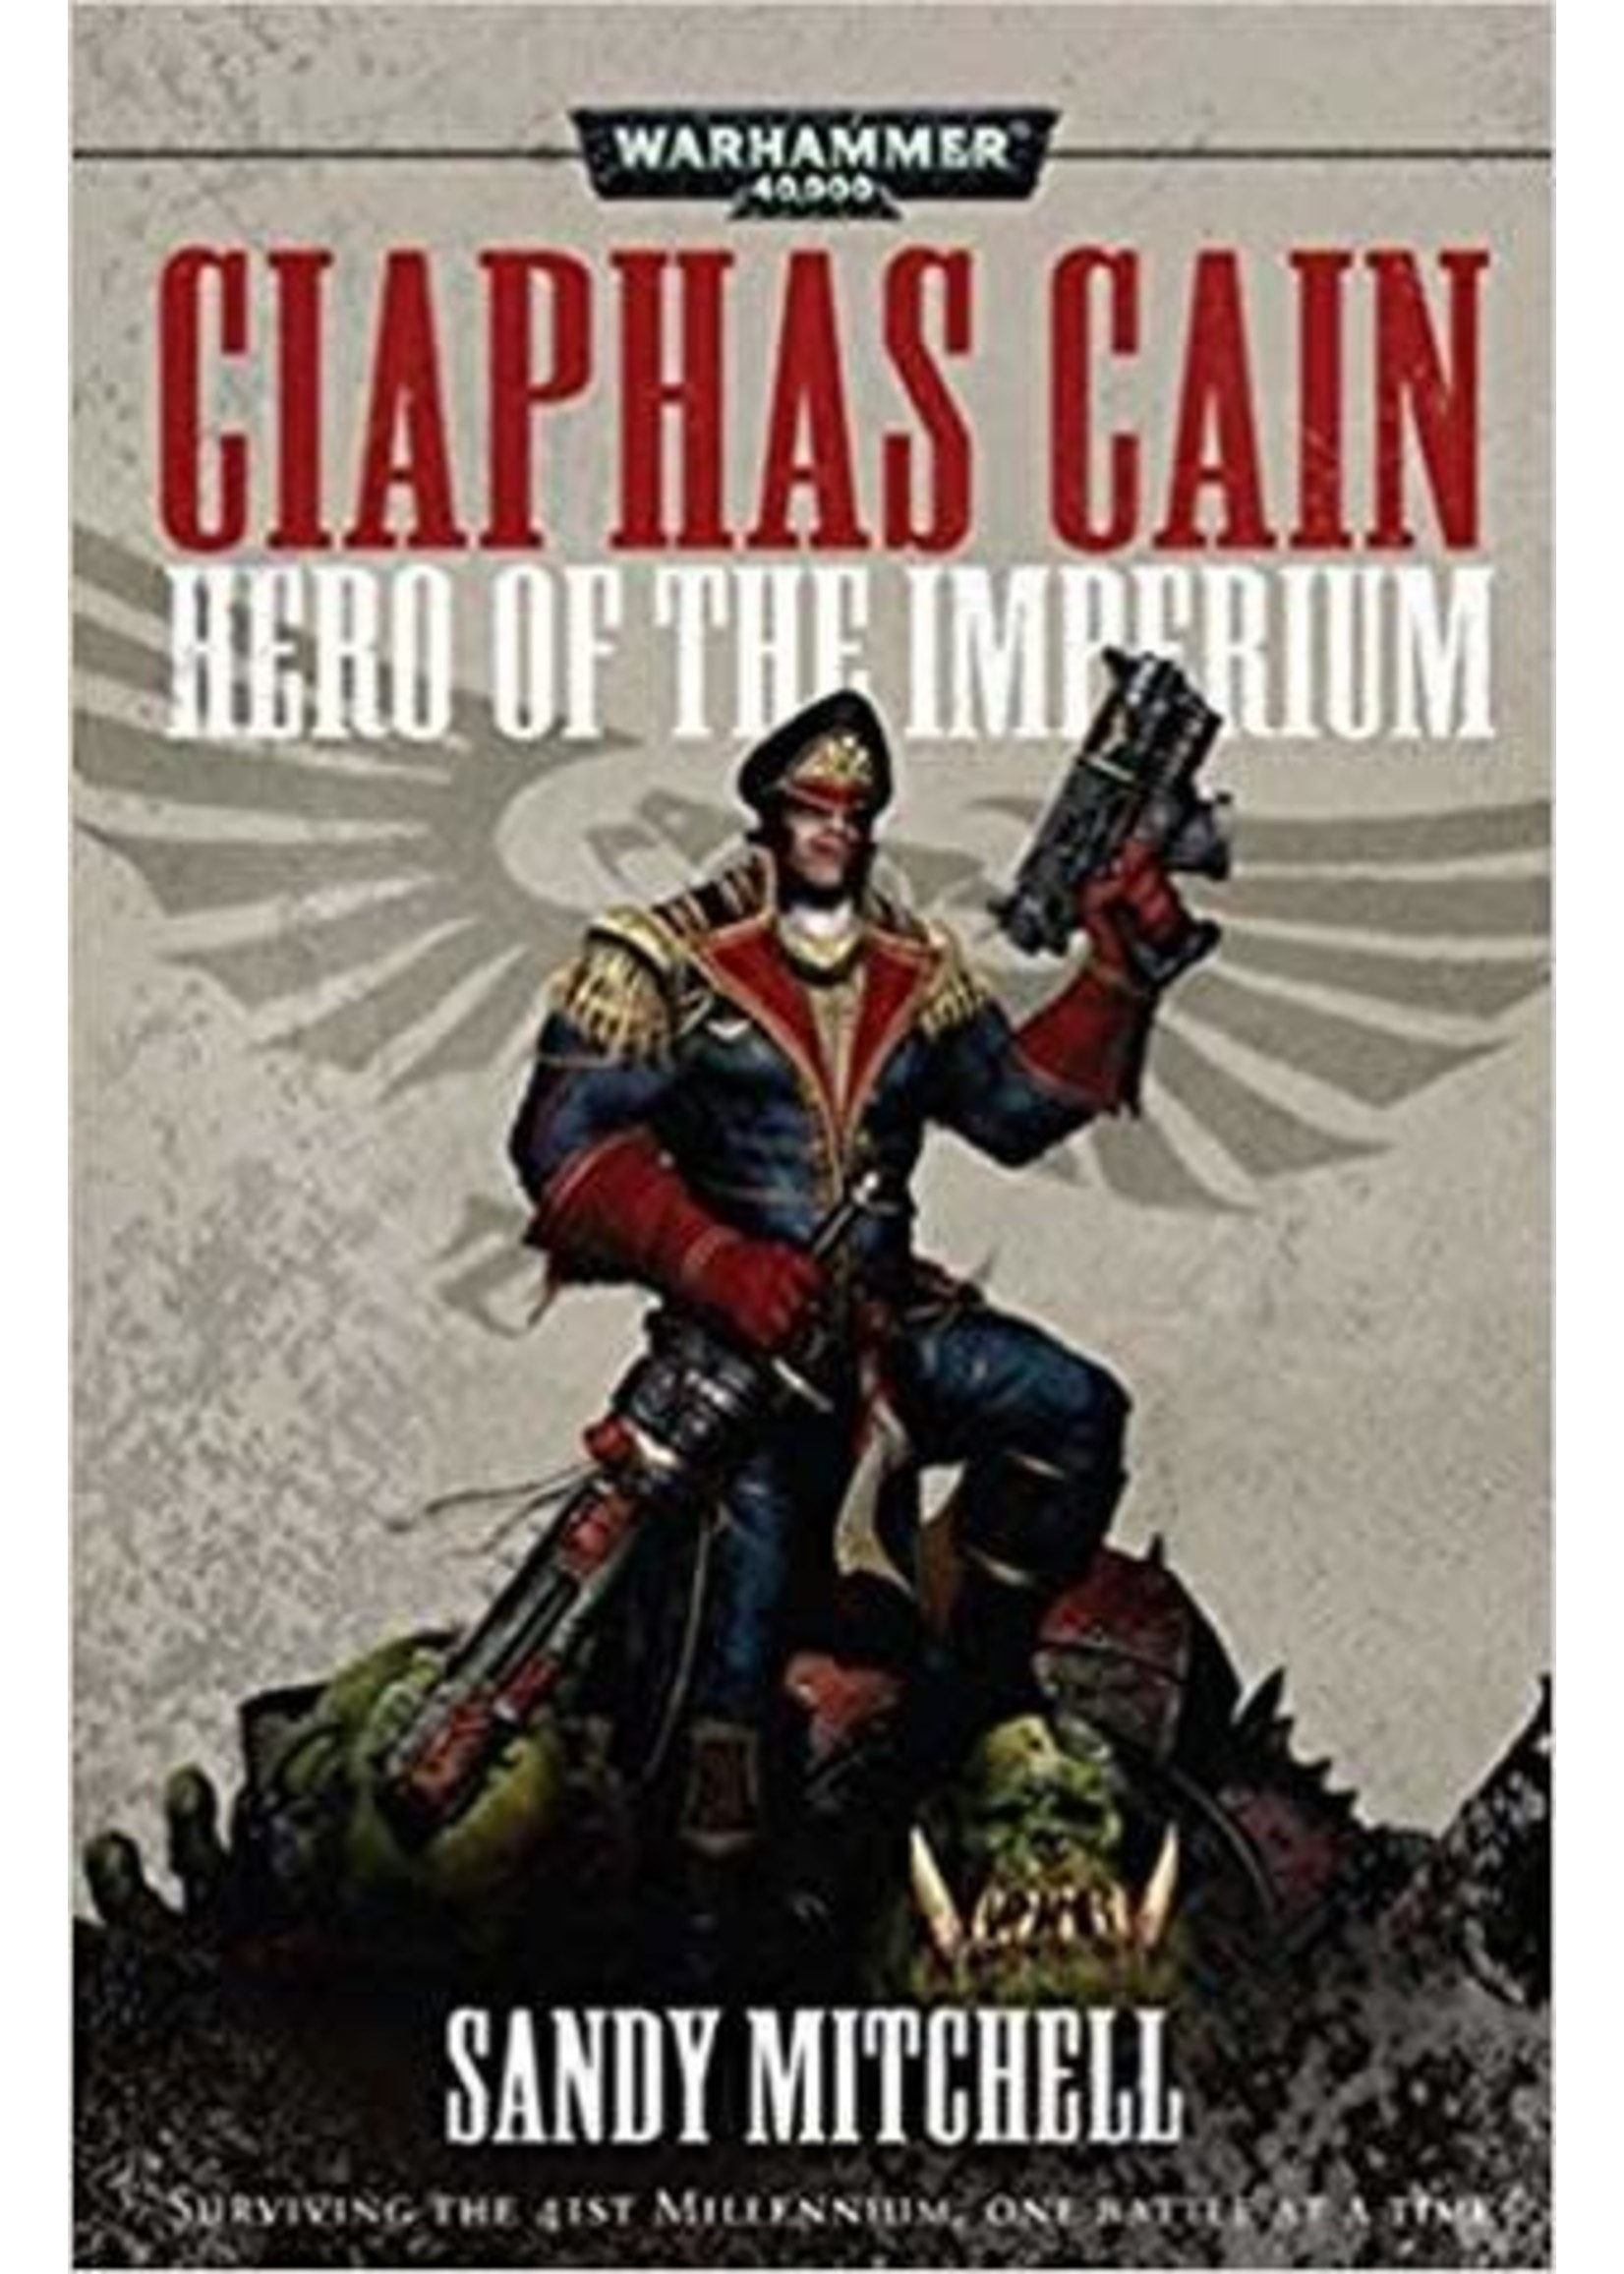 Hero of the Imperium (Ciaphas Cain #1-3) by Sandy Mitchell